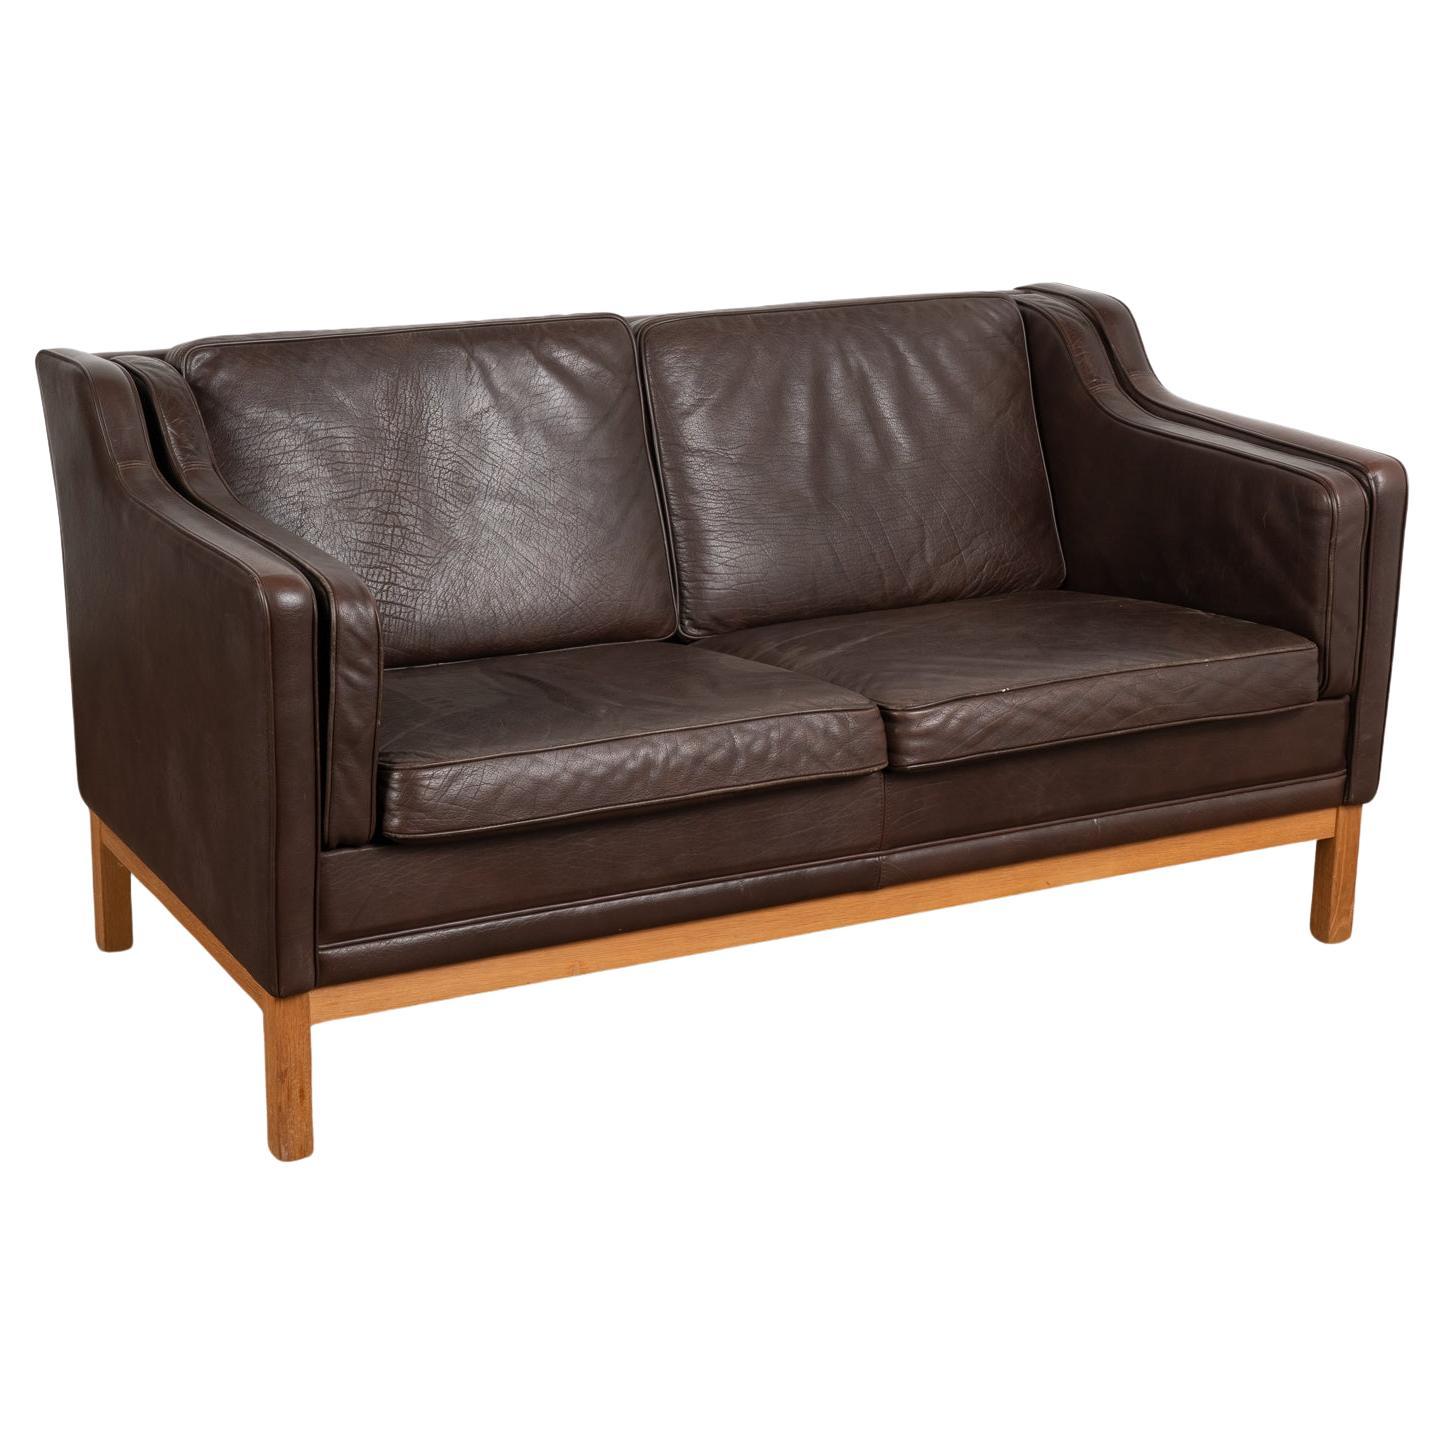 Mid Century Modern Two Seat Brown Leather Sofa Loveseat, Denmark circa 1960 For Sale